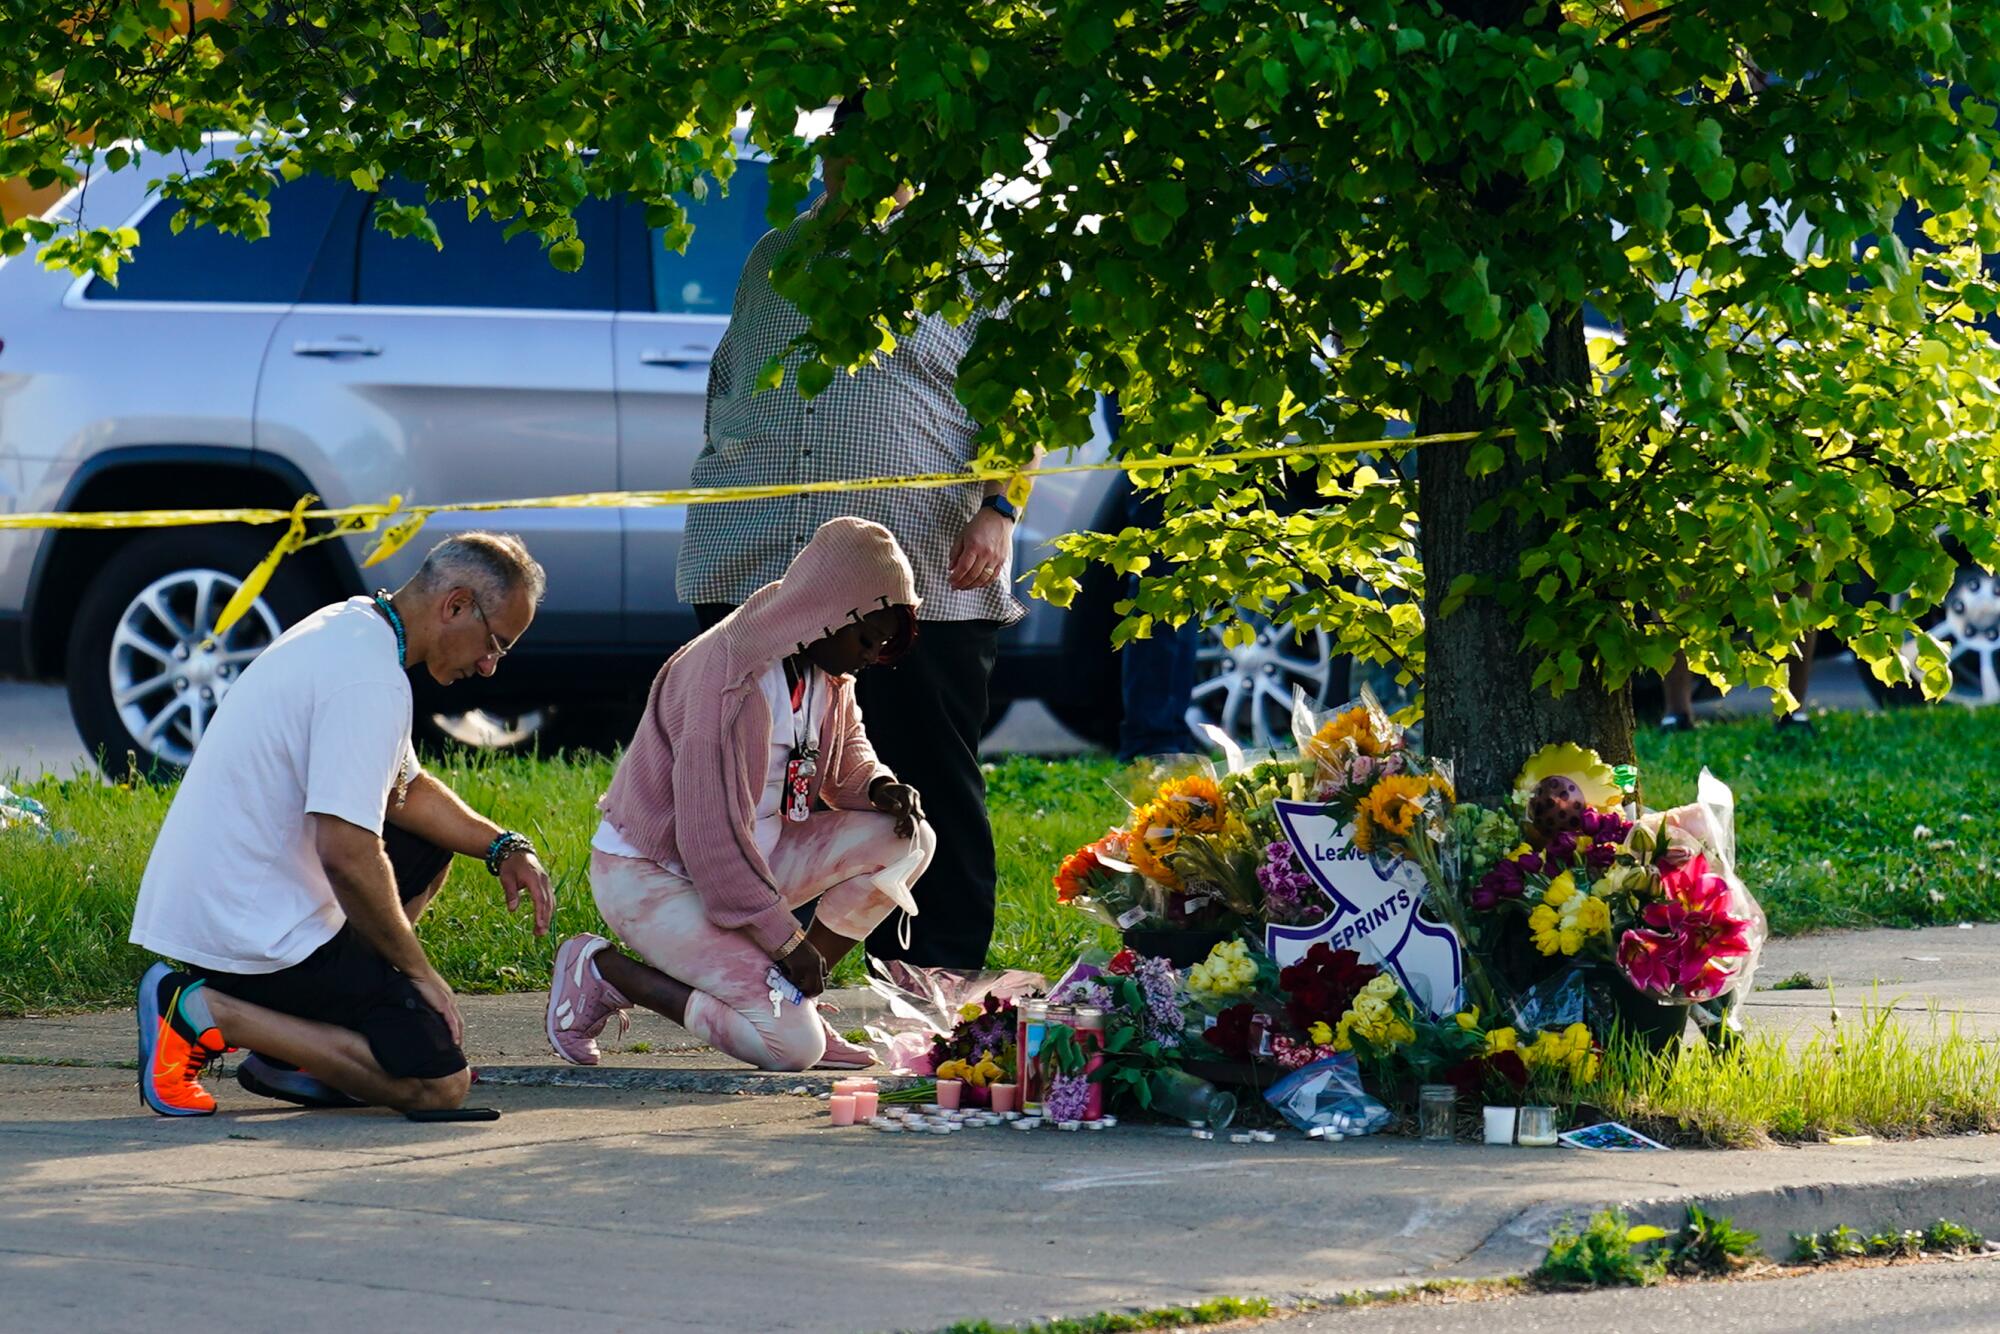 People kneel next to a flower memorial on the sidewalk near a tree and yellow police tape